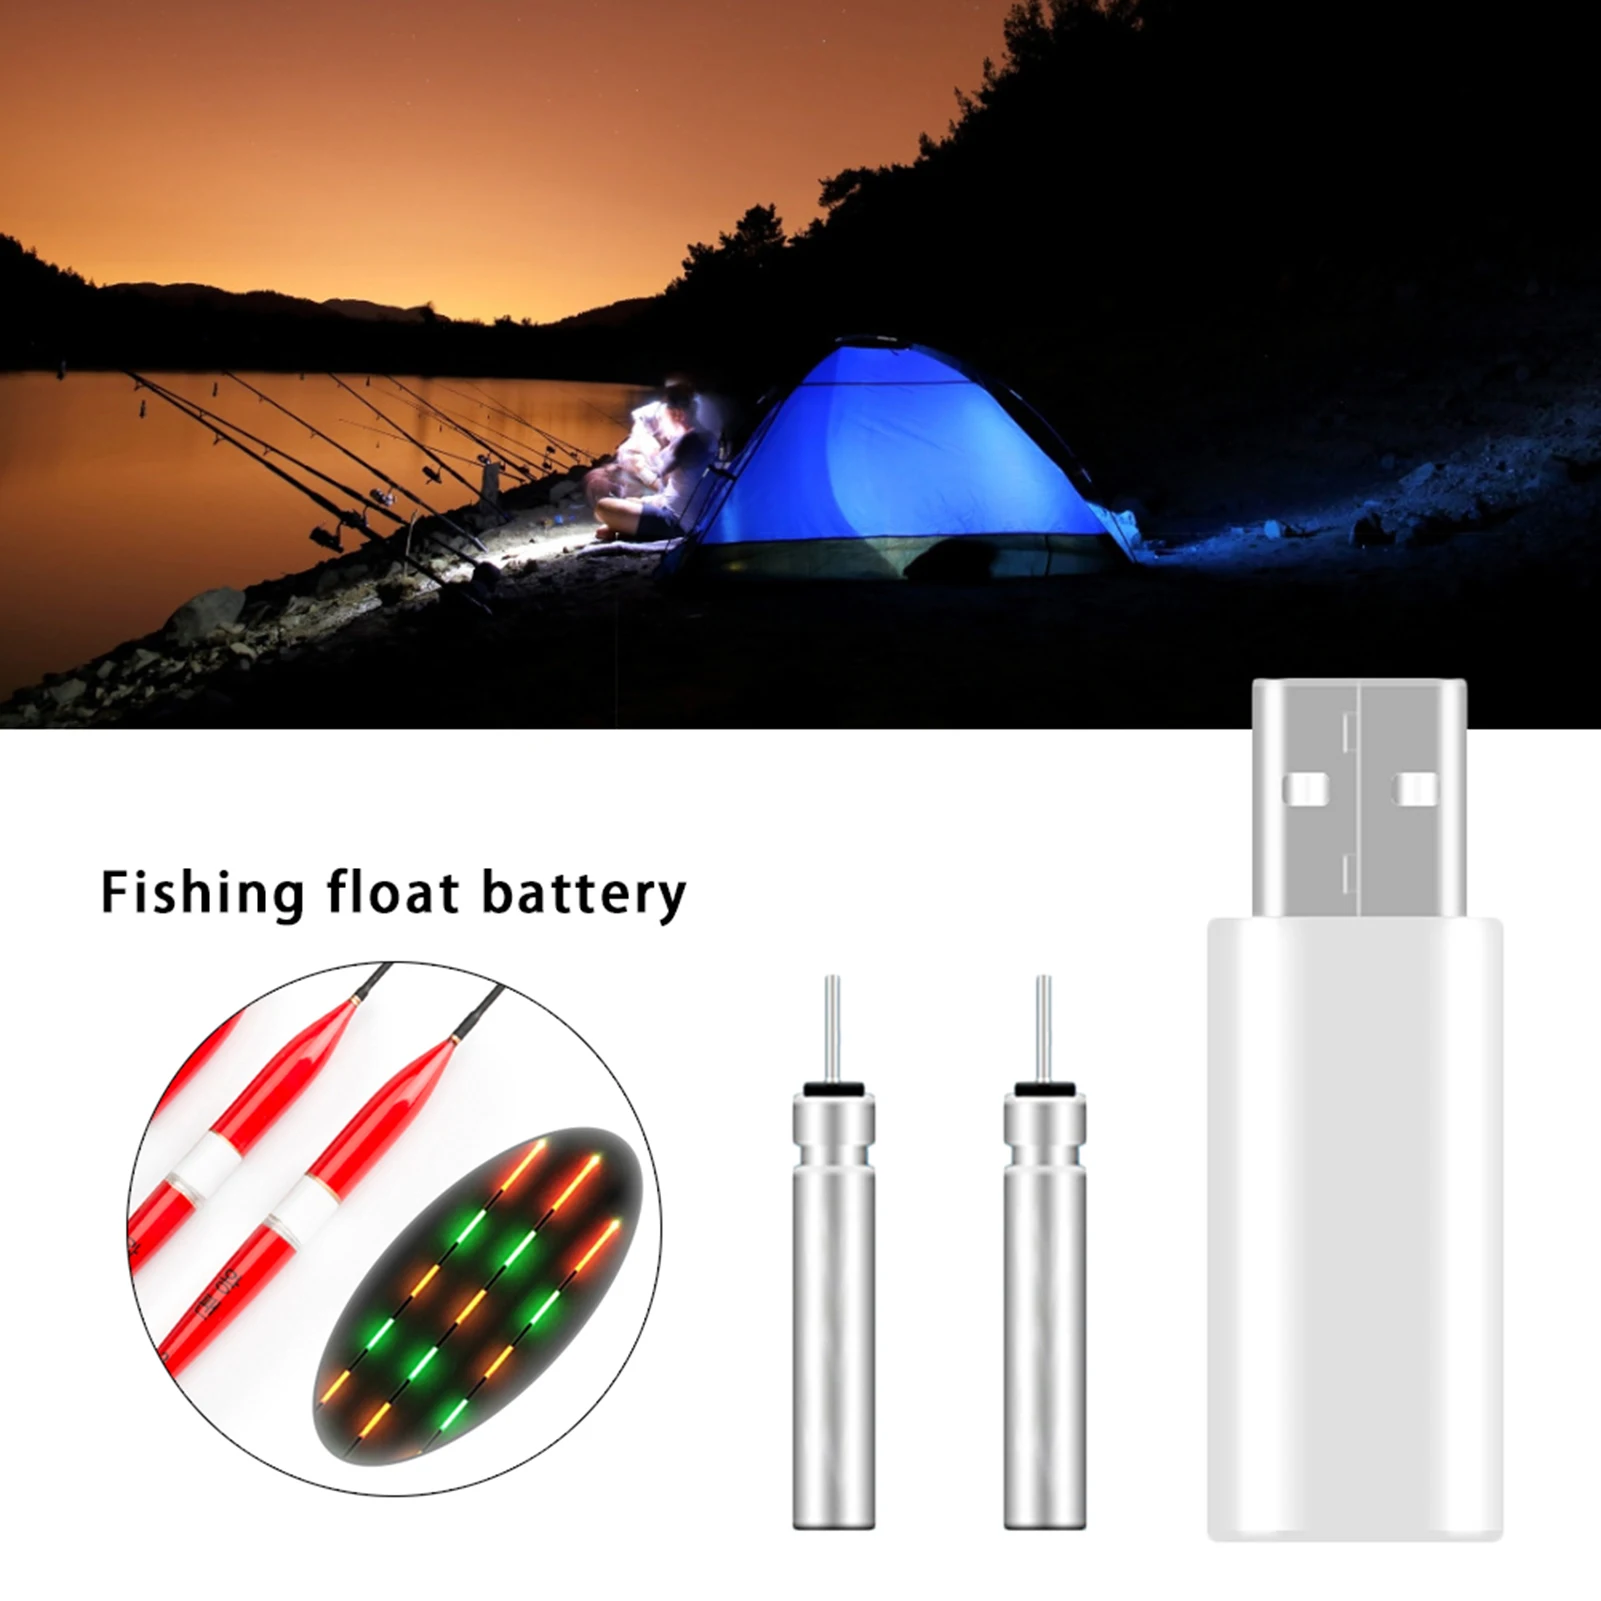 2021 Luminous Fishing Floats CR425 Night Fishing Buoy Tools Fresh Water Bobber Tackle Luminous Floats CR425 Tackle Accessories images - 6